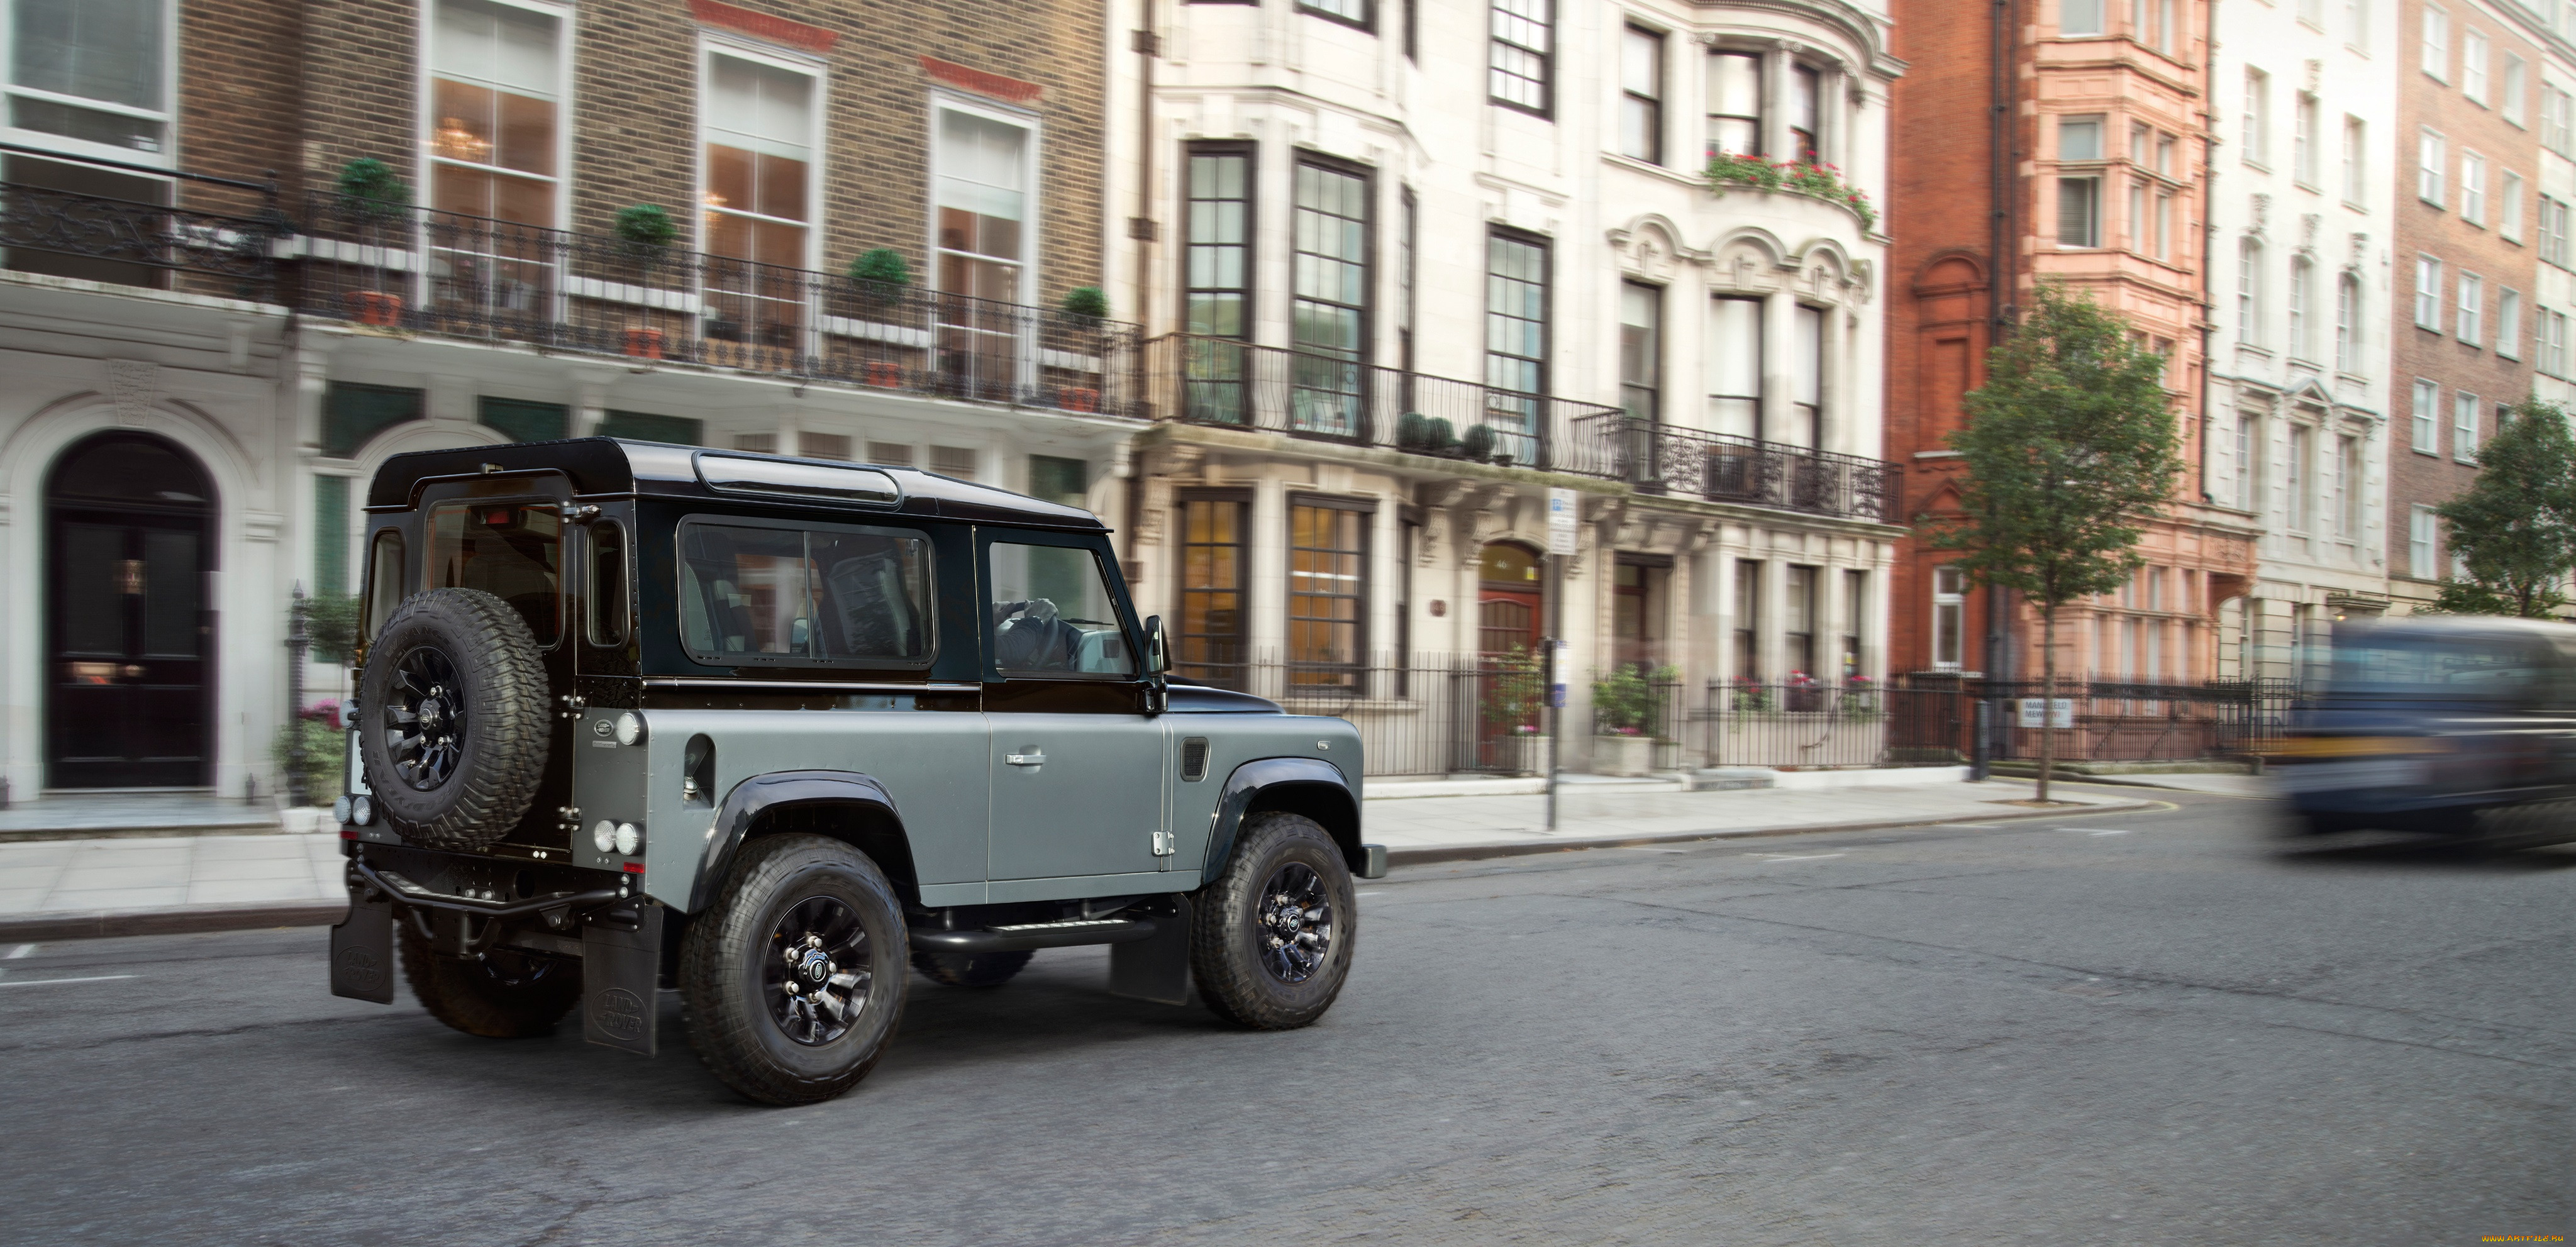 , land-rover, 2015, autobiography, defender, 90, land, rover